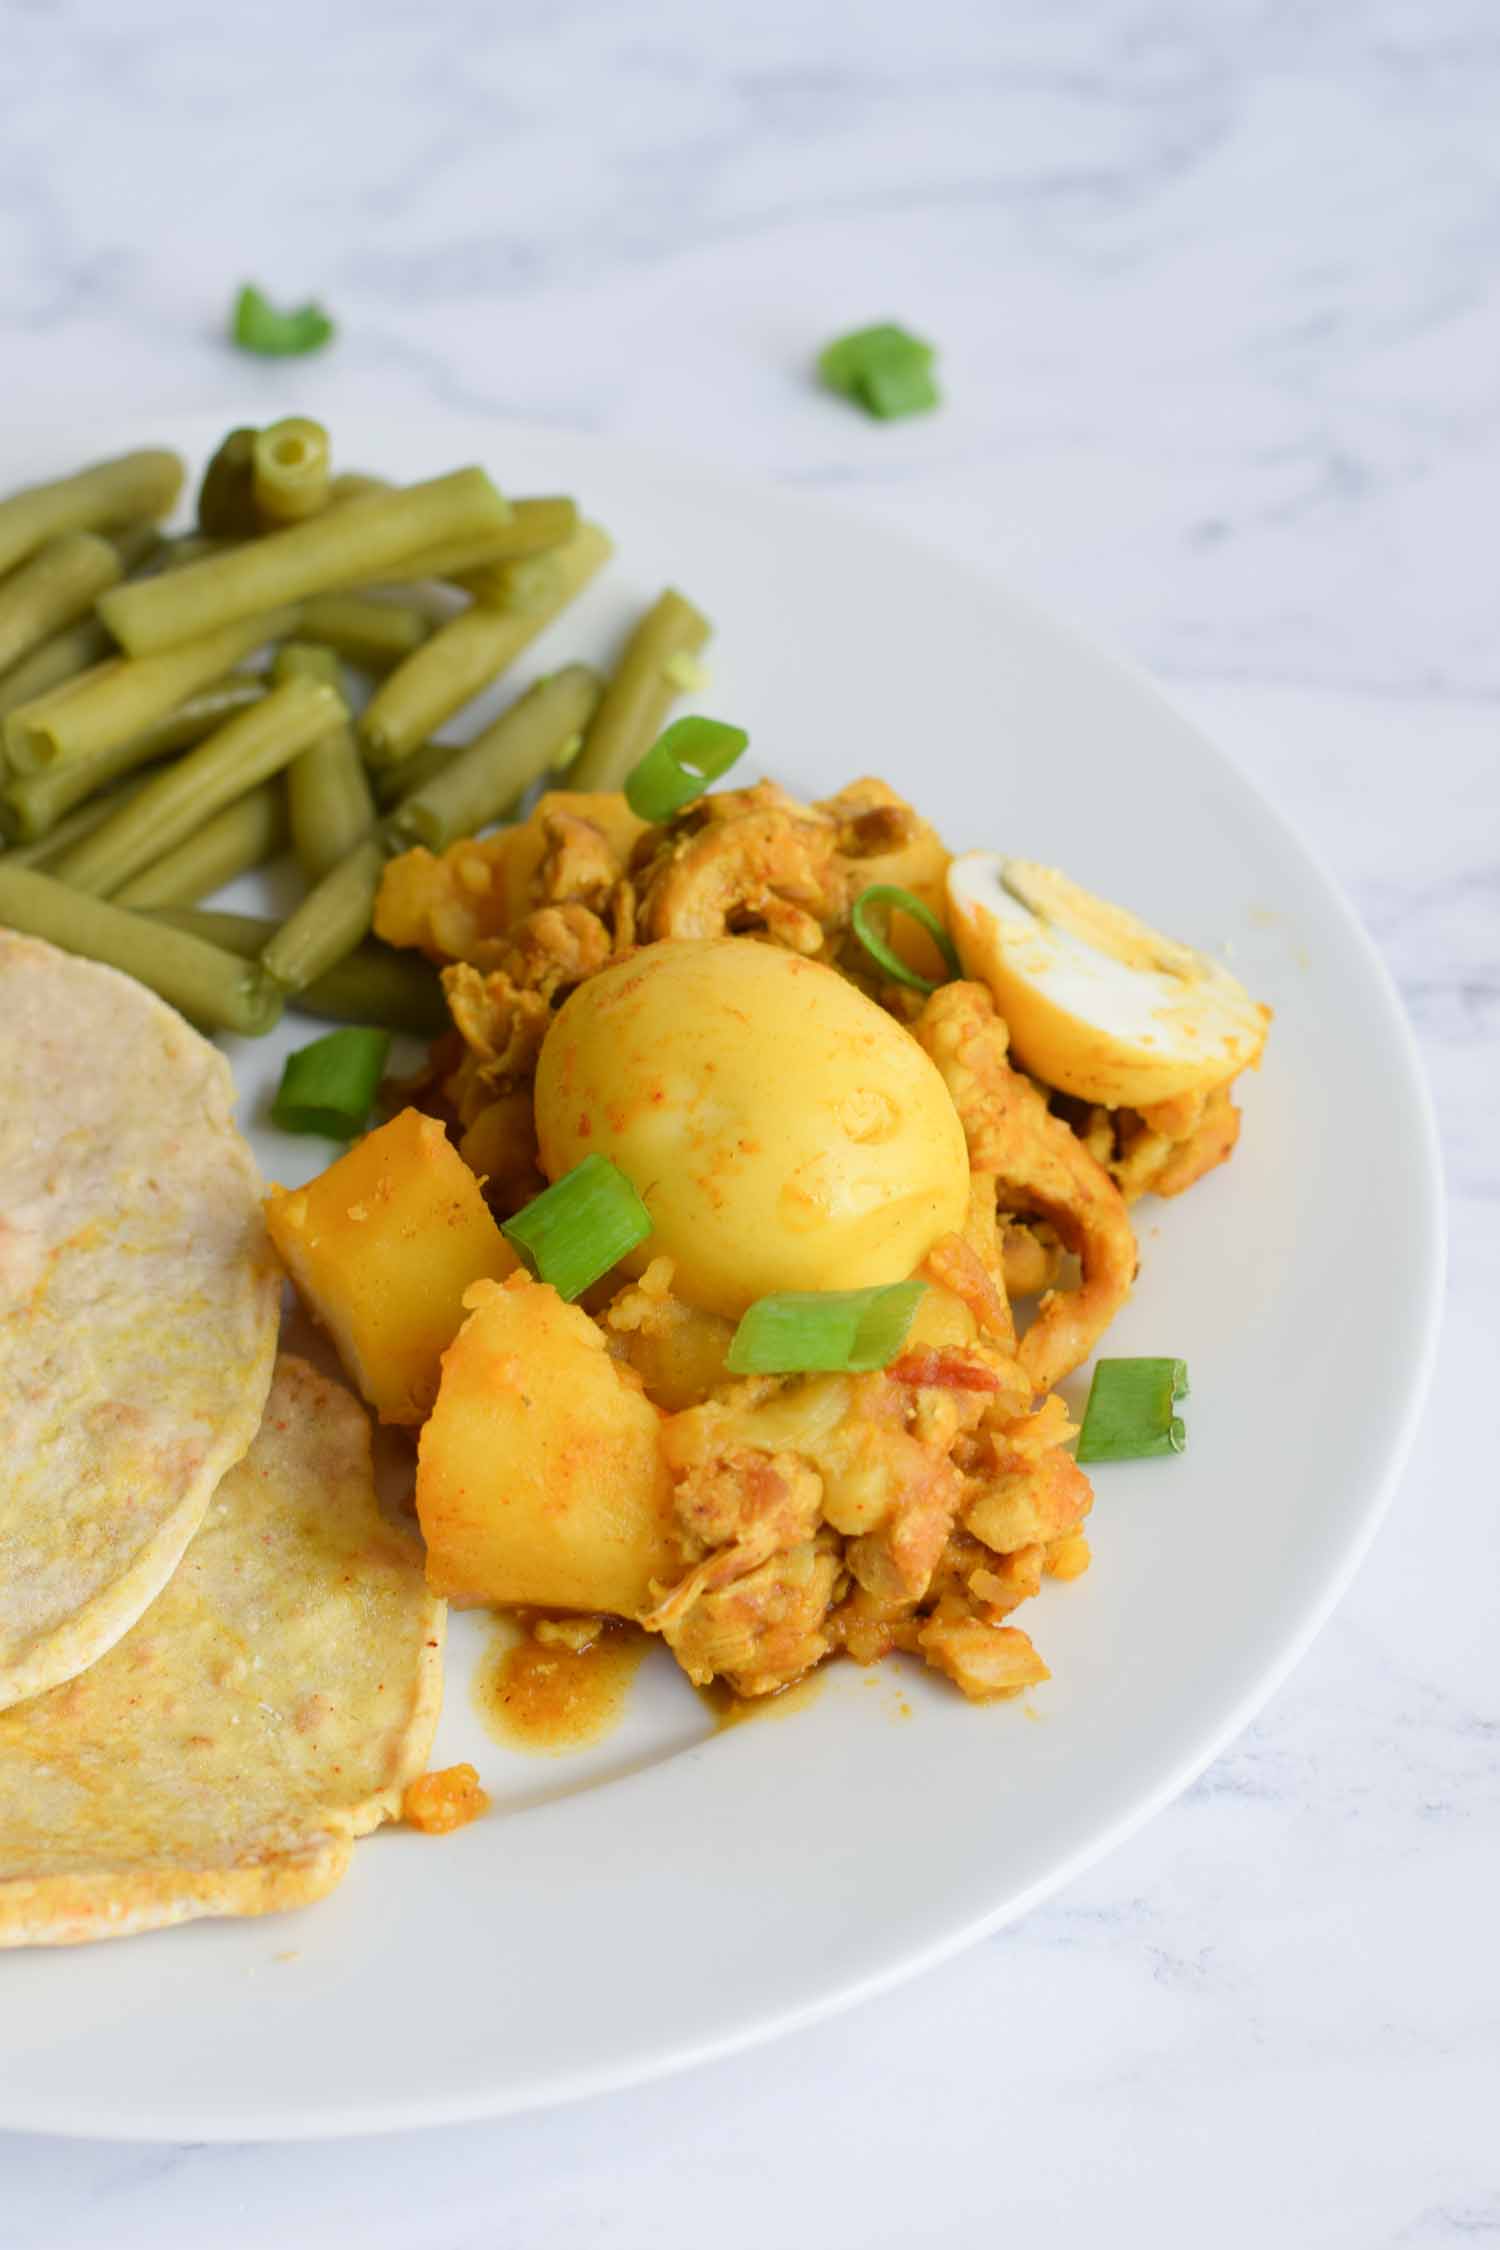 Low FODMAP roti on a plate with green beans